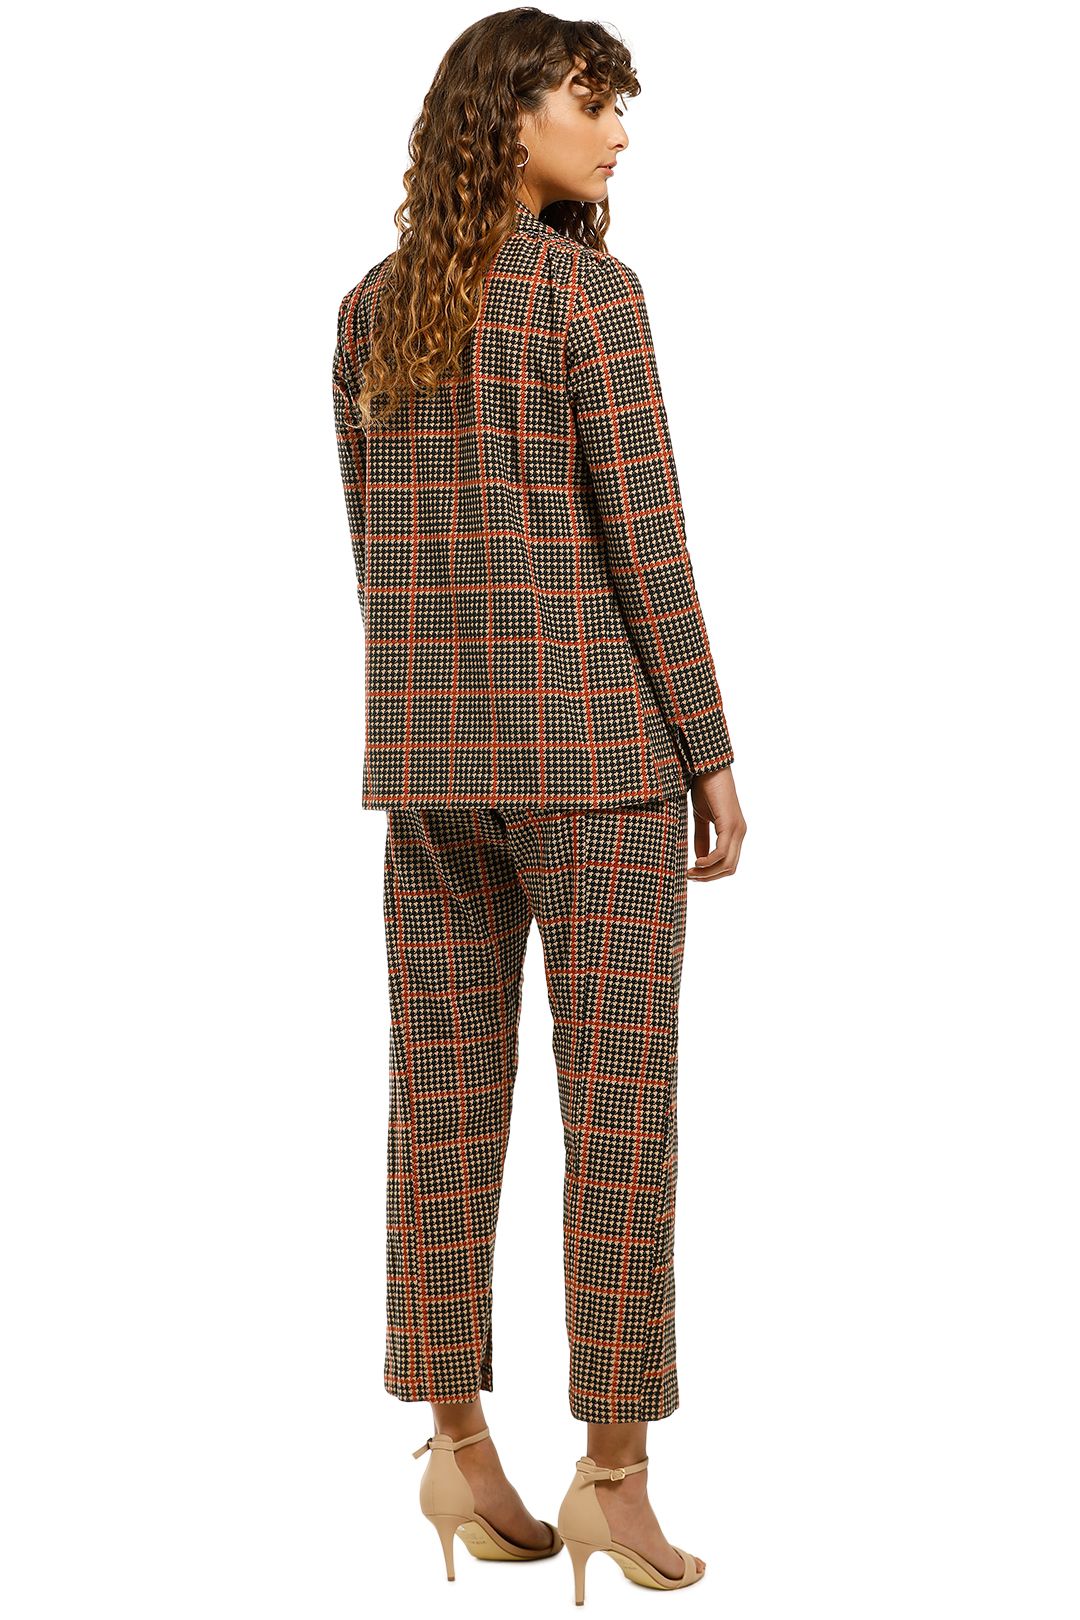 Rue-Stiic-Tennesse-Blazer-and-Pant-Set-Houndstooth-Back